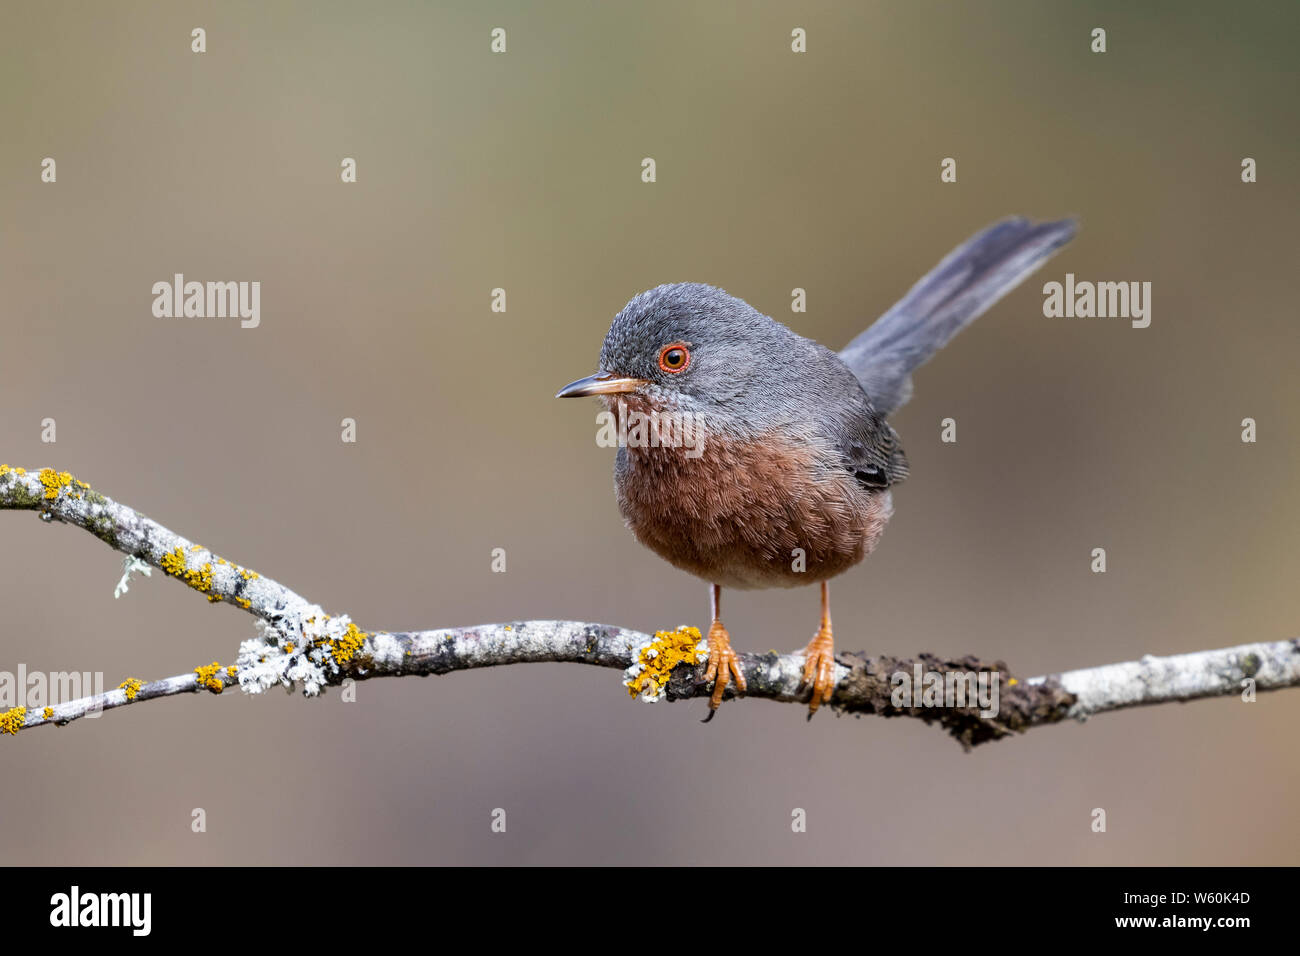 Dartford warbler, (Sylvia undata), perched on a branch of a tree. Spain Stock Photo